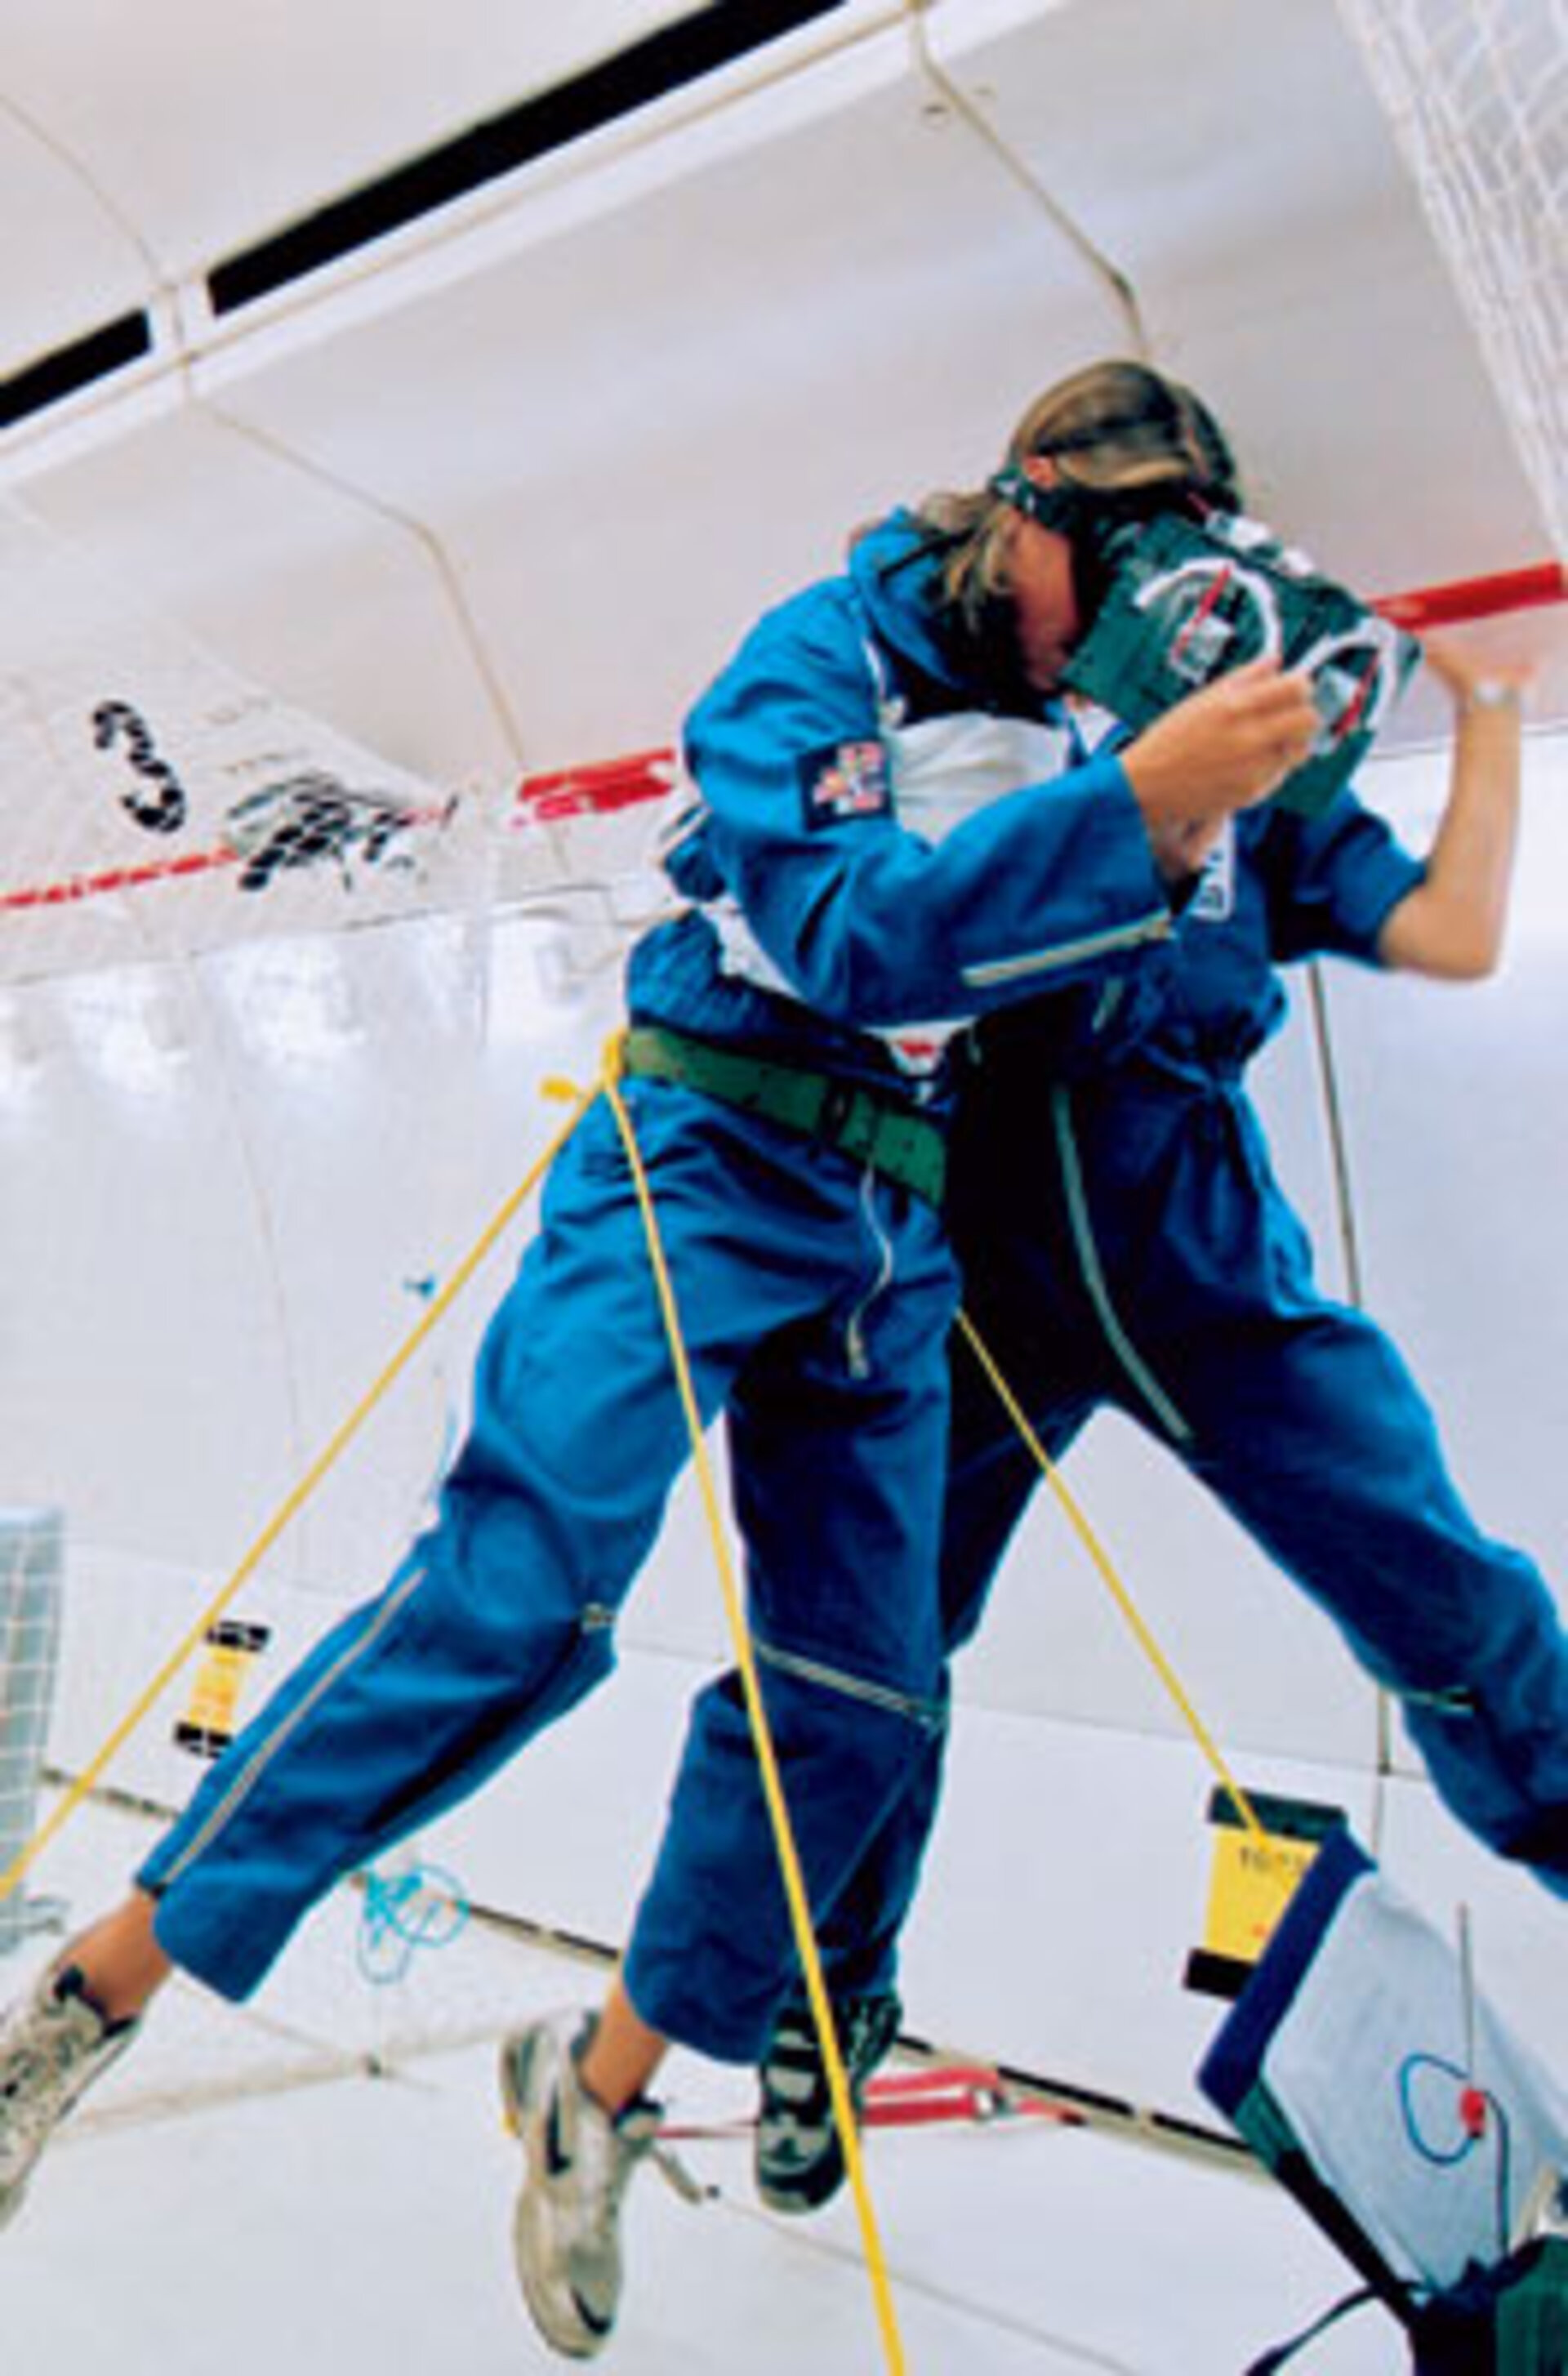 Students in weightlessness working on their experiments